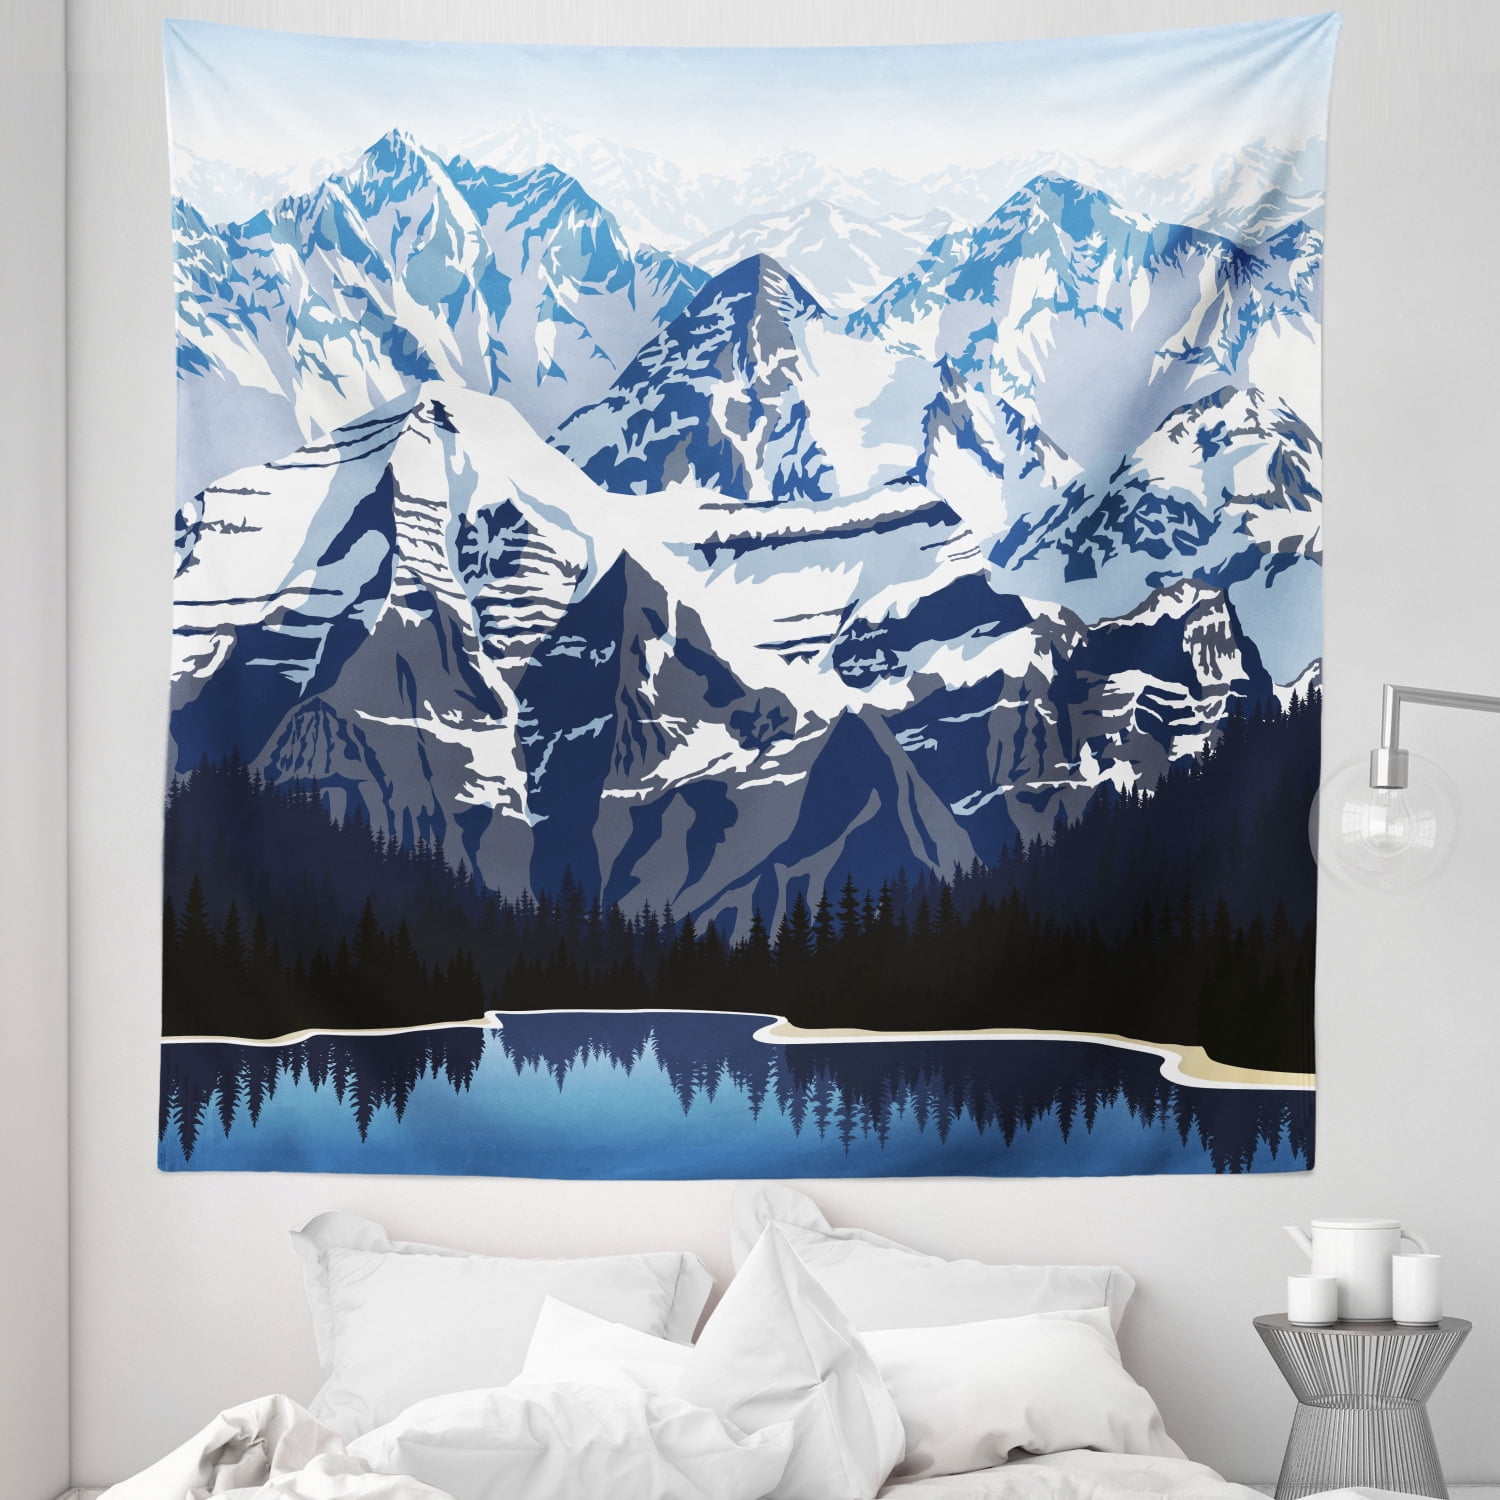 Scenery Tapestry, Cartoon Like Mountain with Snow Landscape with ...